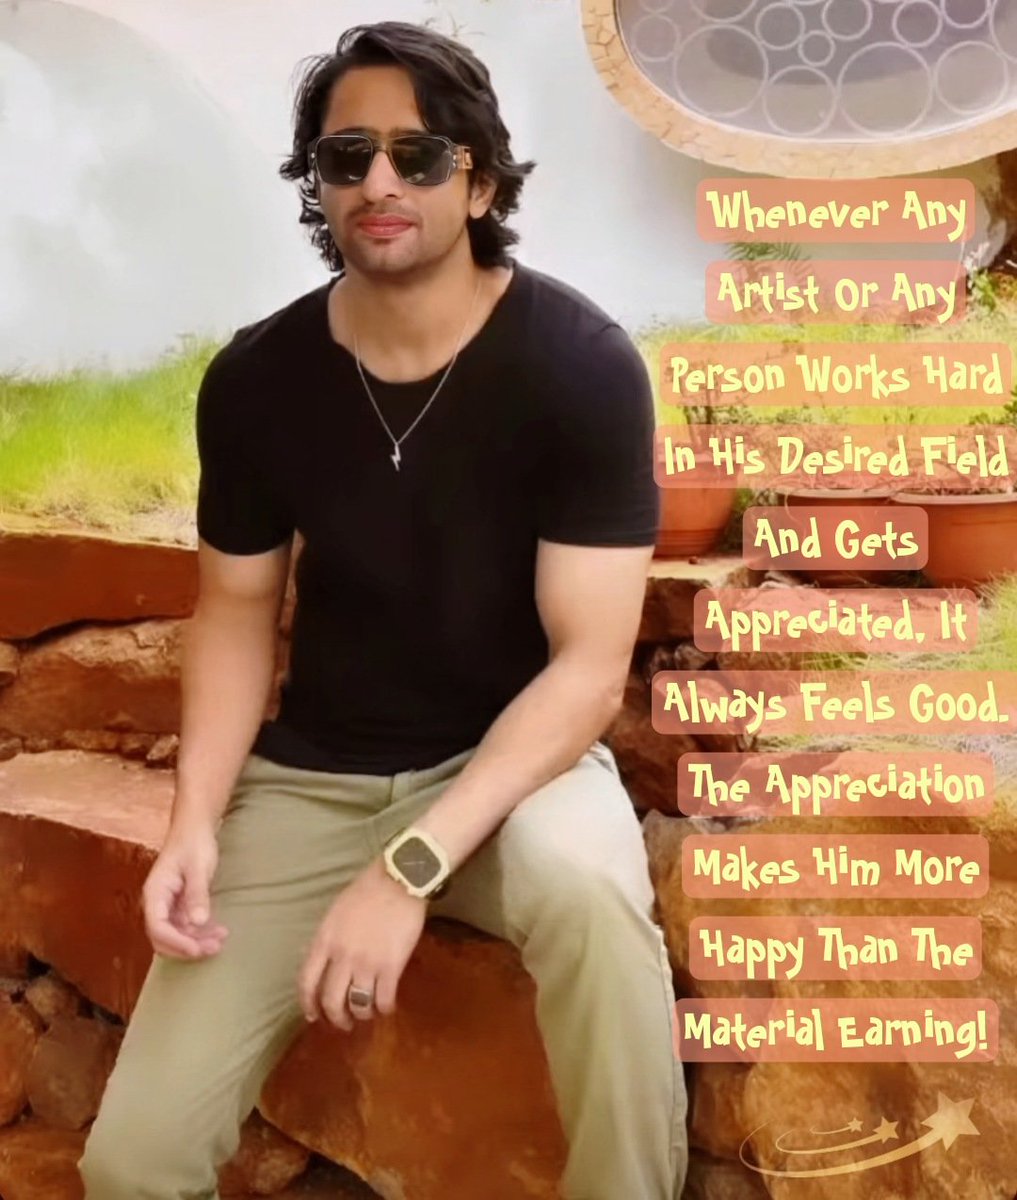 Whenever Any Artist Or Any Person Works Hard In His Desired Field&Gets Appreciated It Always Feels Good. The Appreciation Makes Him More Happy Than The Material Earning! @Shaheer_S 💫

#SSQuotes #ShaheerSayings #StayHealthy #RiseNShine #LoveAndRespect

#GodBlessYou #ShaheerSheikh